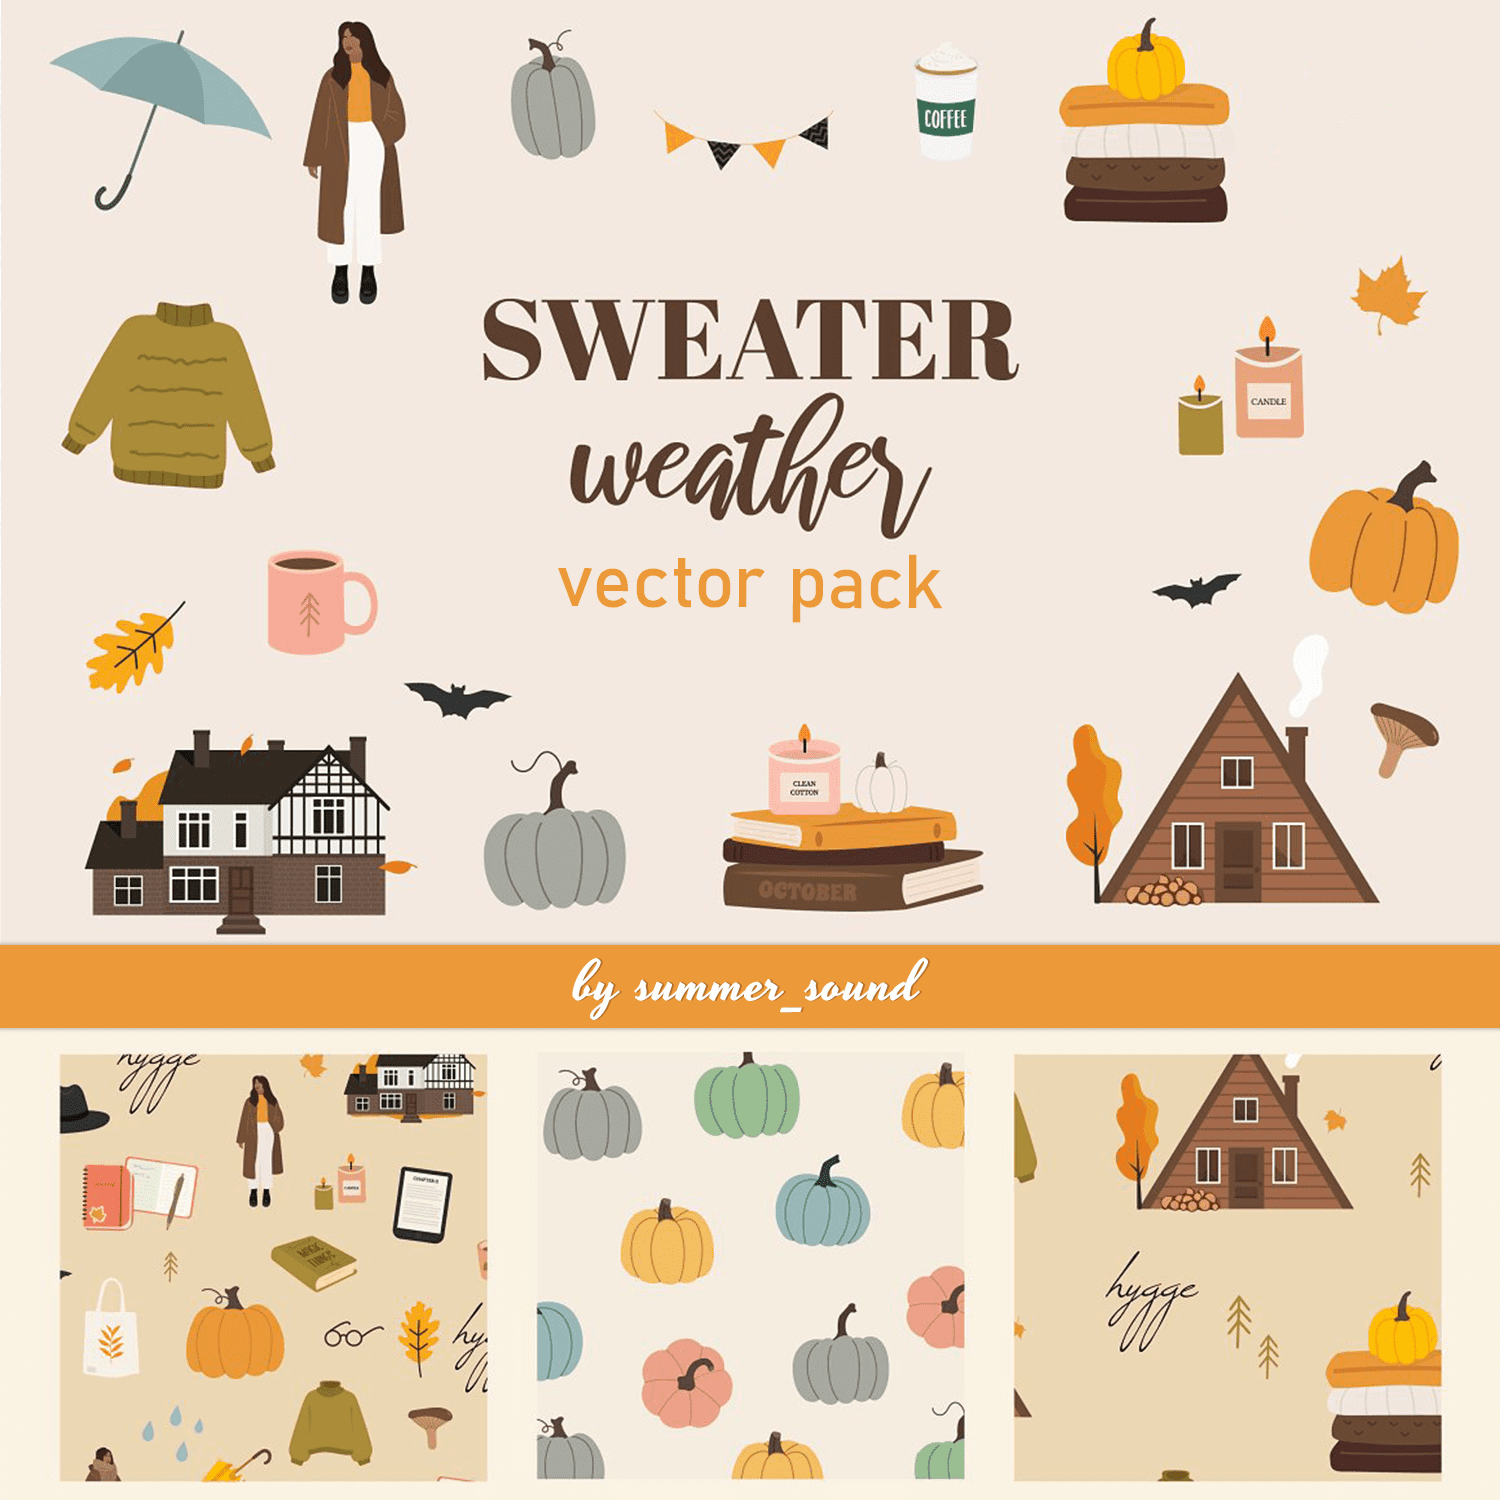 Sweater Weather vector pack cover.